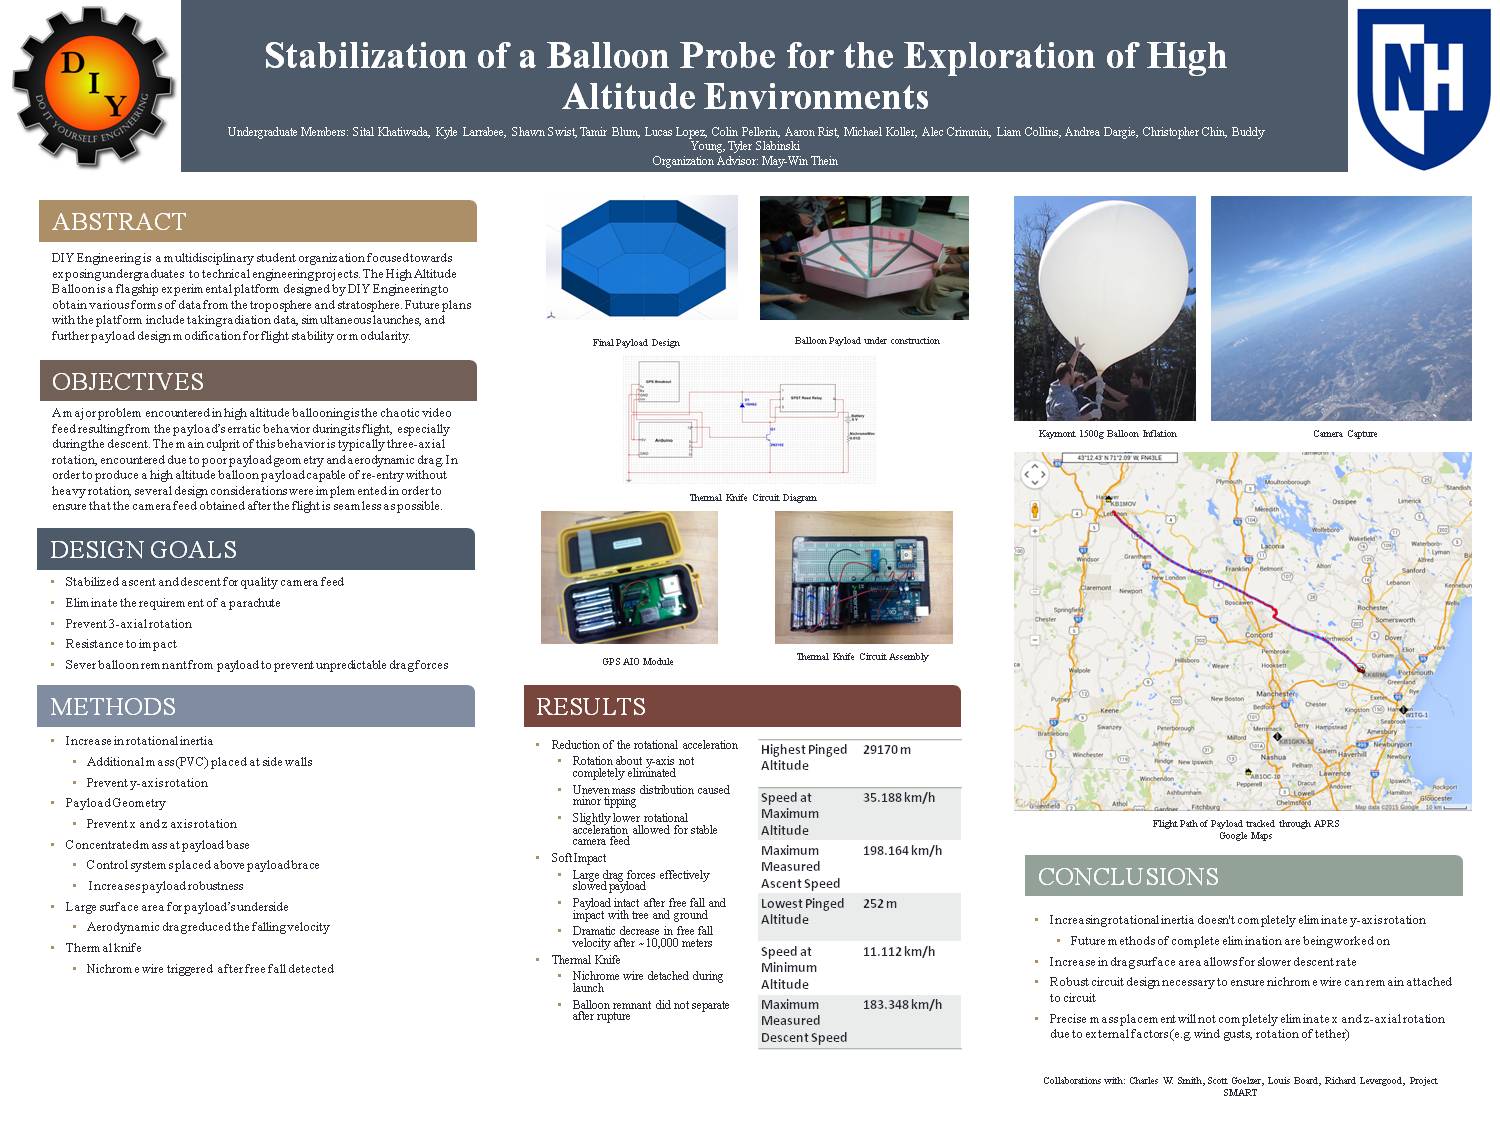 Stabilization Of A Balloon Probe For The Exploration Of High Altitude Enviroments by sxr2